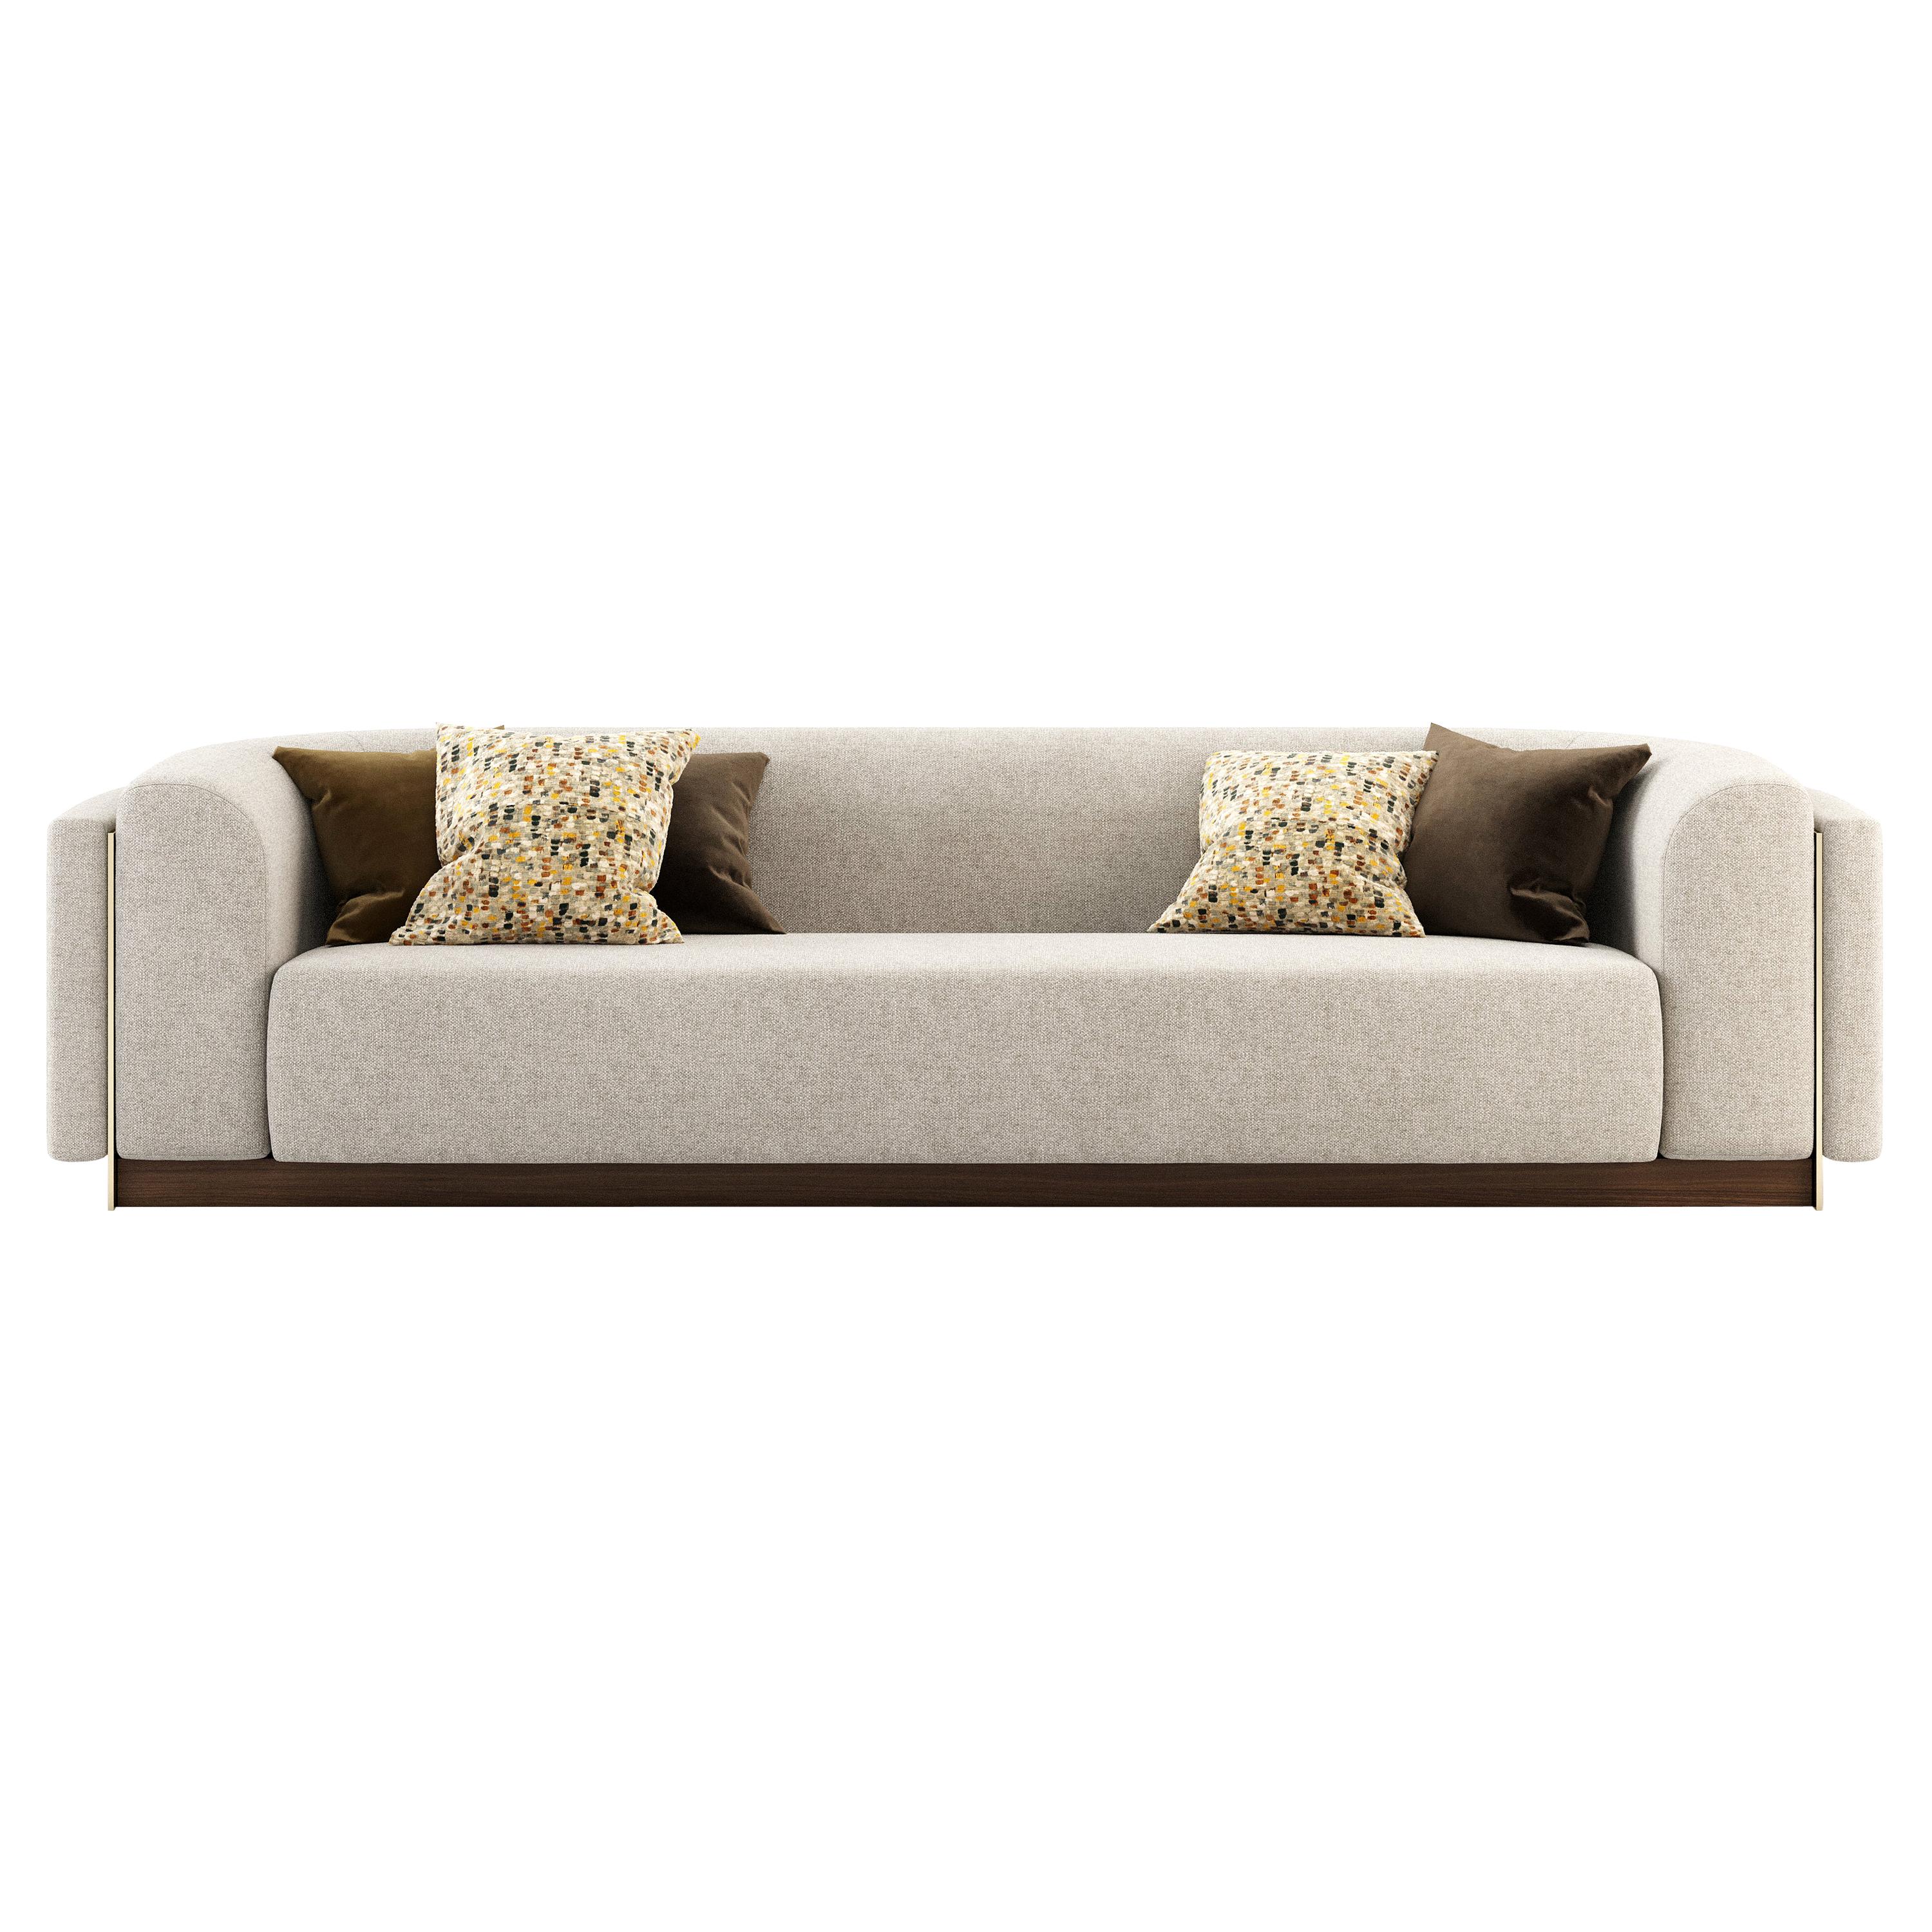 Wellington Sofa, Portuguese 21st Century Contemporary Upholstered in Leather